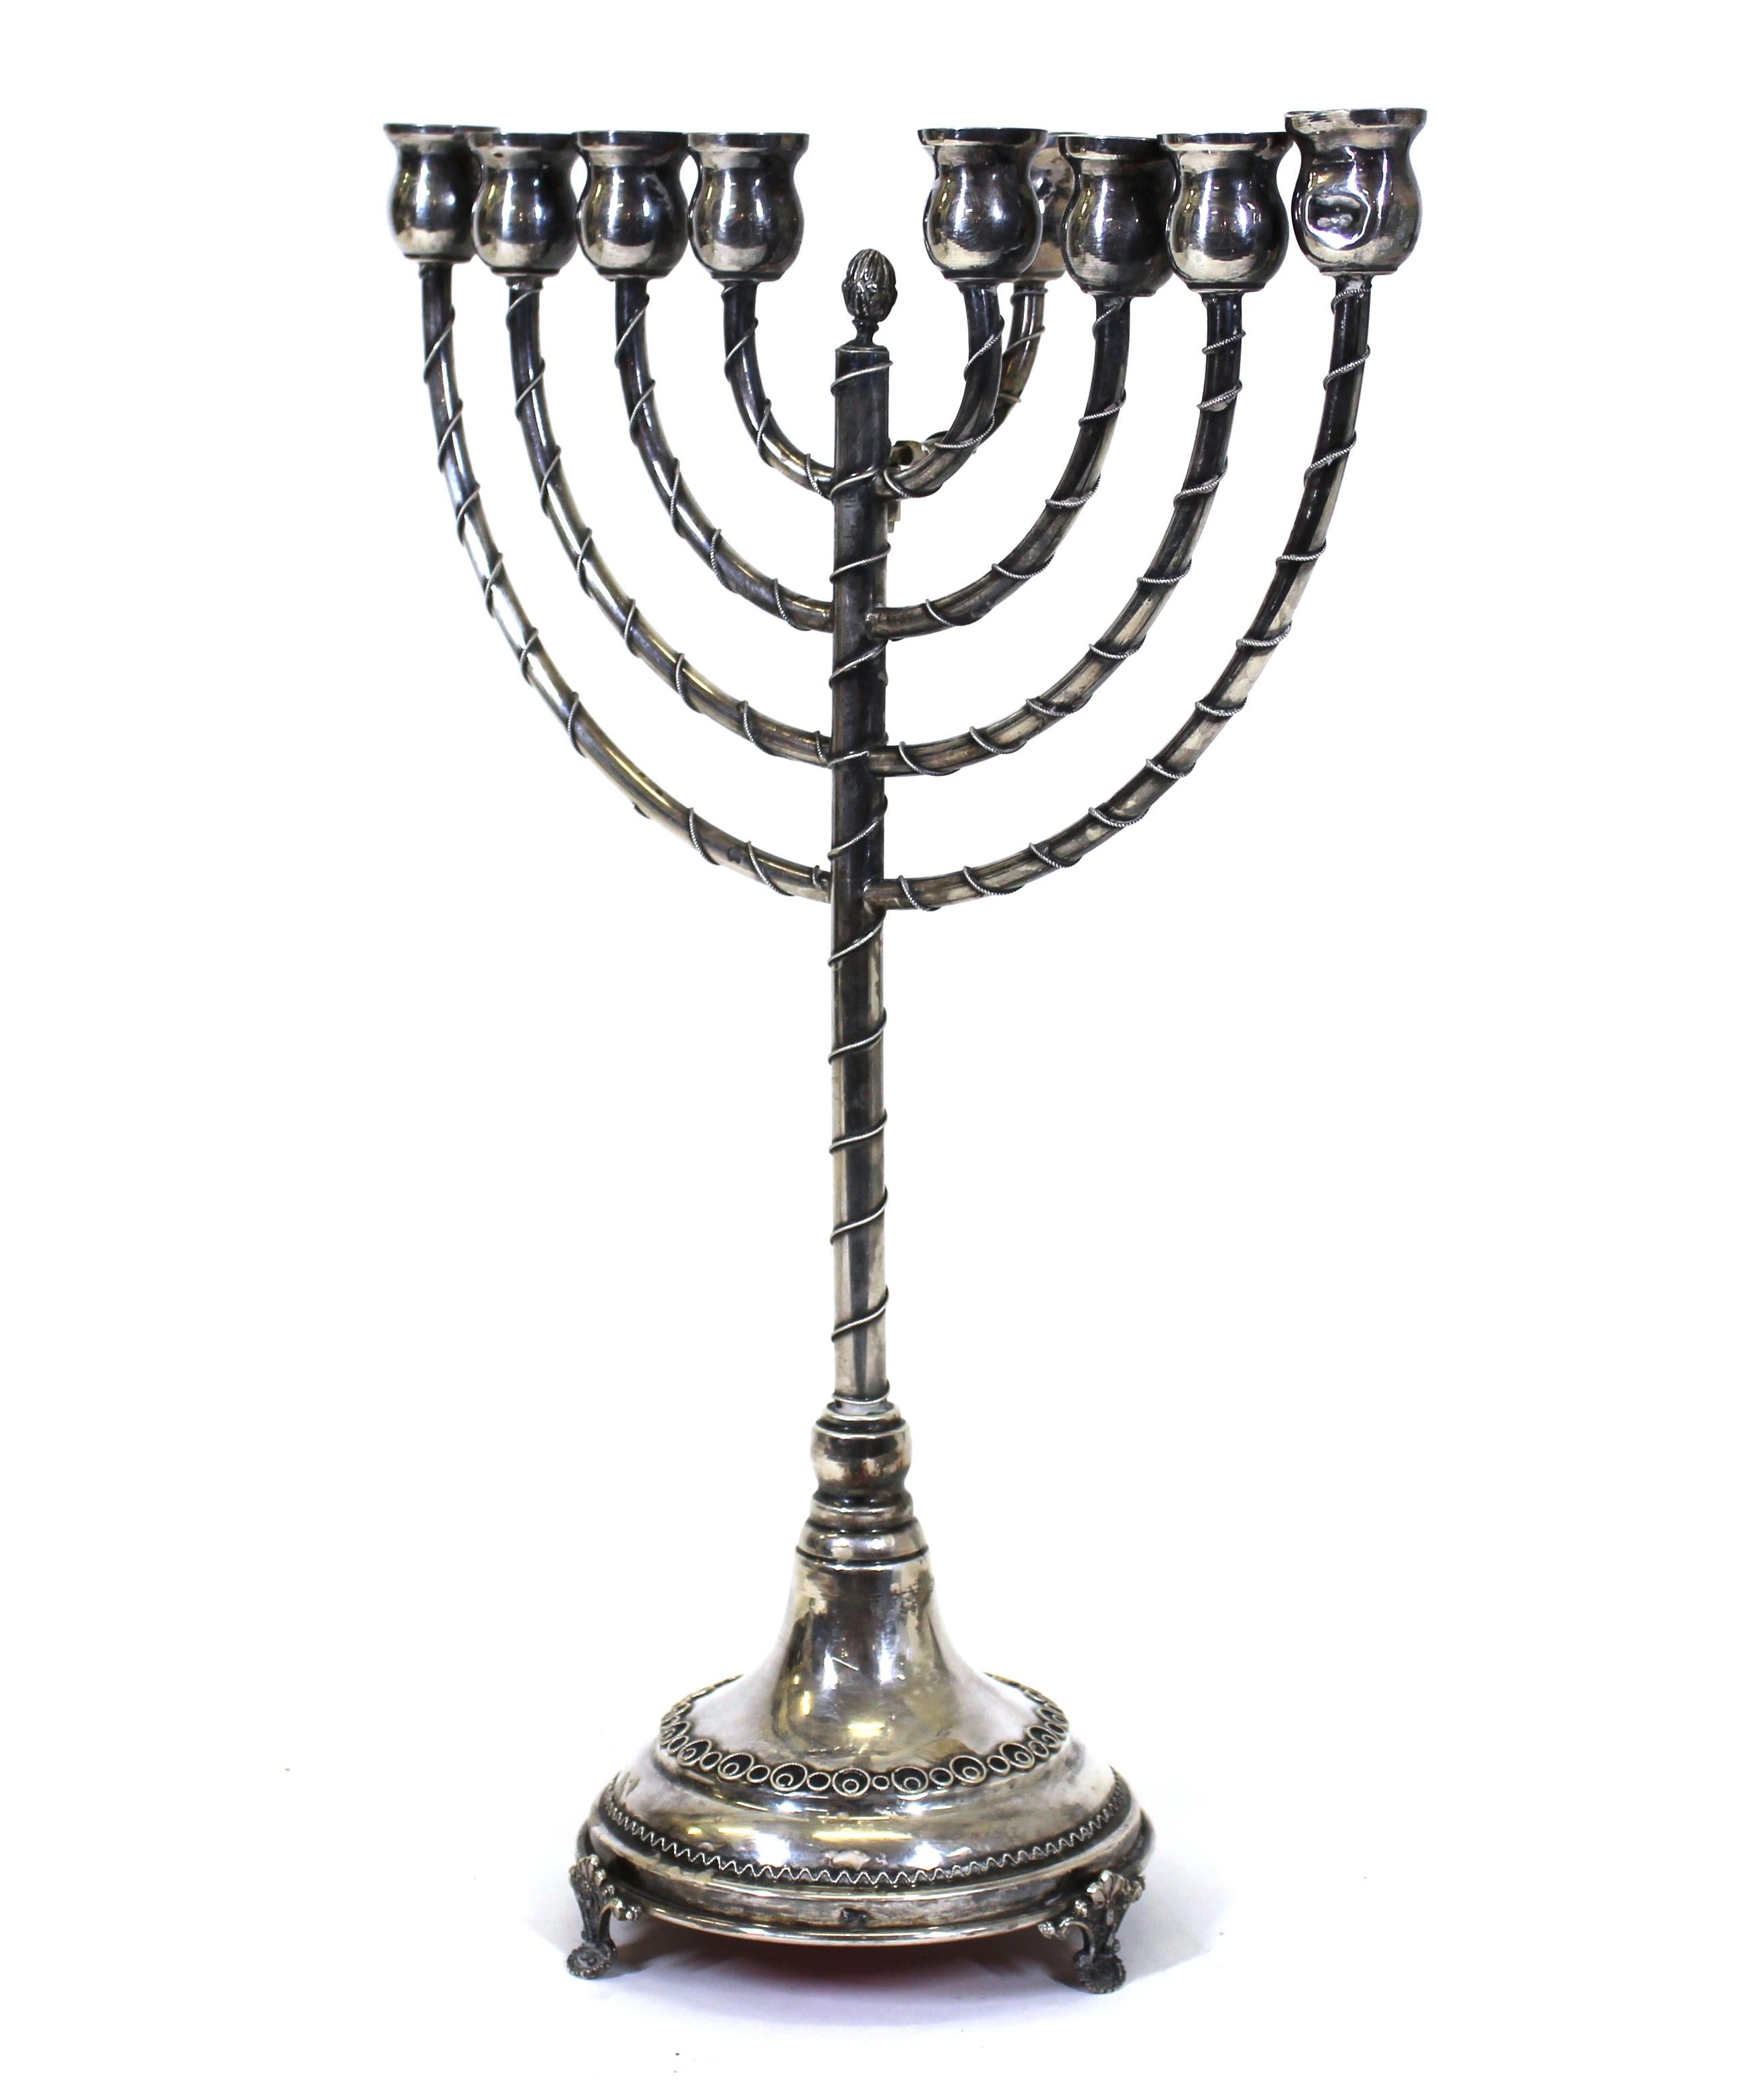 Judaica sterling silver Chanukah menorah, with mark on the foot. In remarkable antique condition with age-appropriate wear.